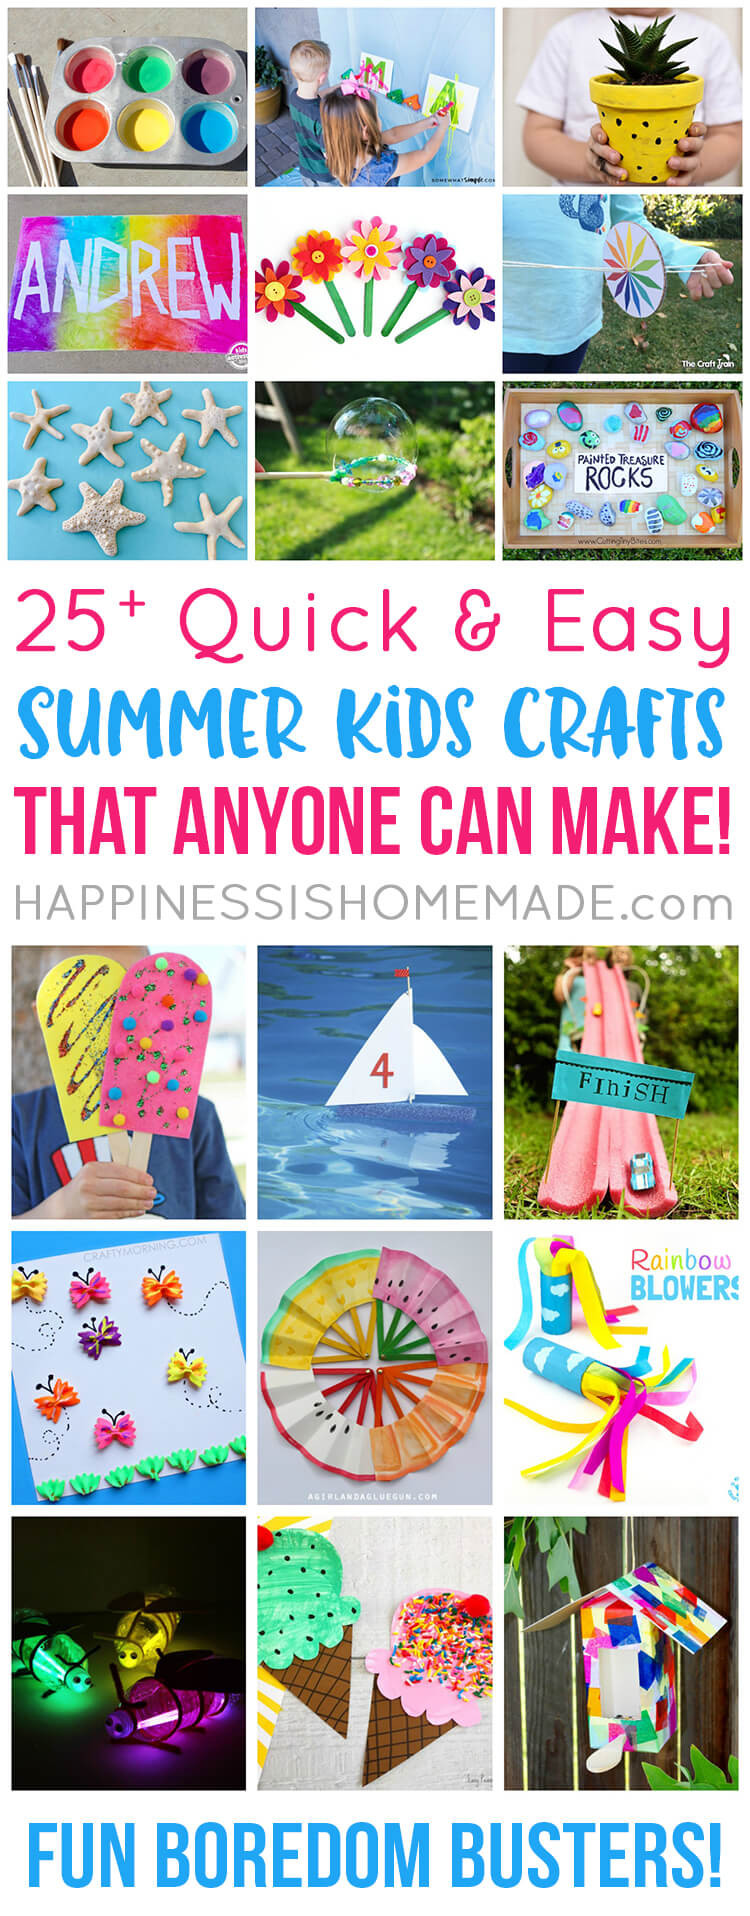 Summer Crafts Ideas For Kids
 Easy Summer Kids Crafts That Anyone Can Make Happiness